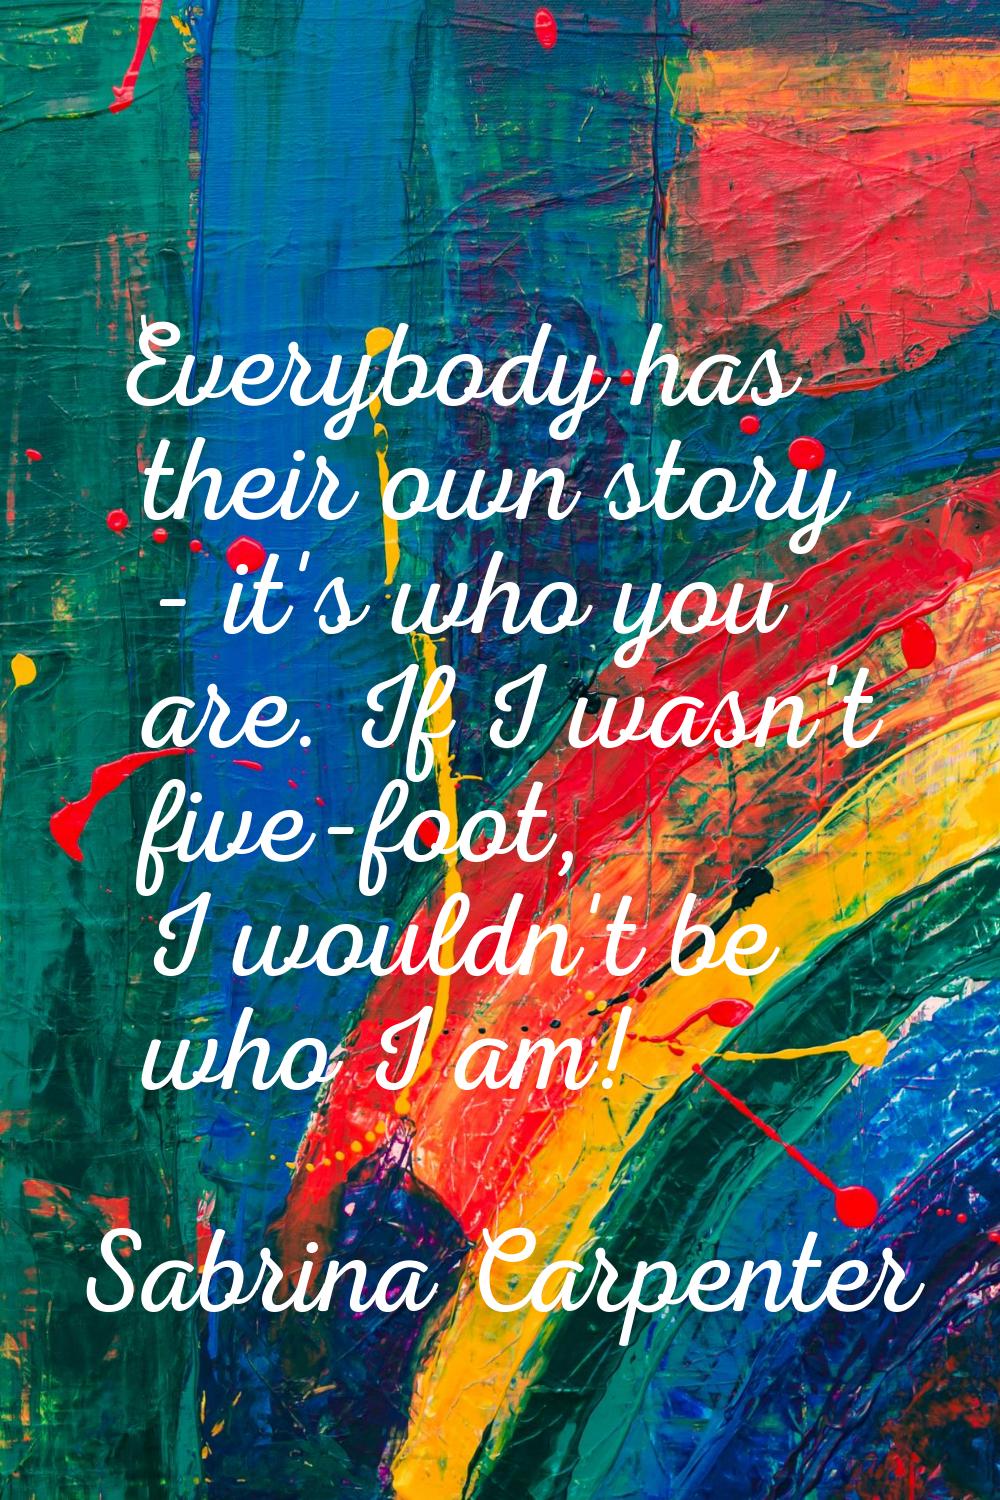 Everybody has their own story - it's who you are. If I wasn't five-foot, I wouldn't be who I am!